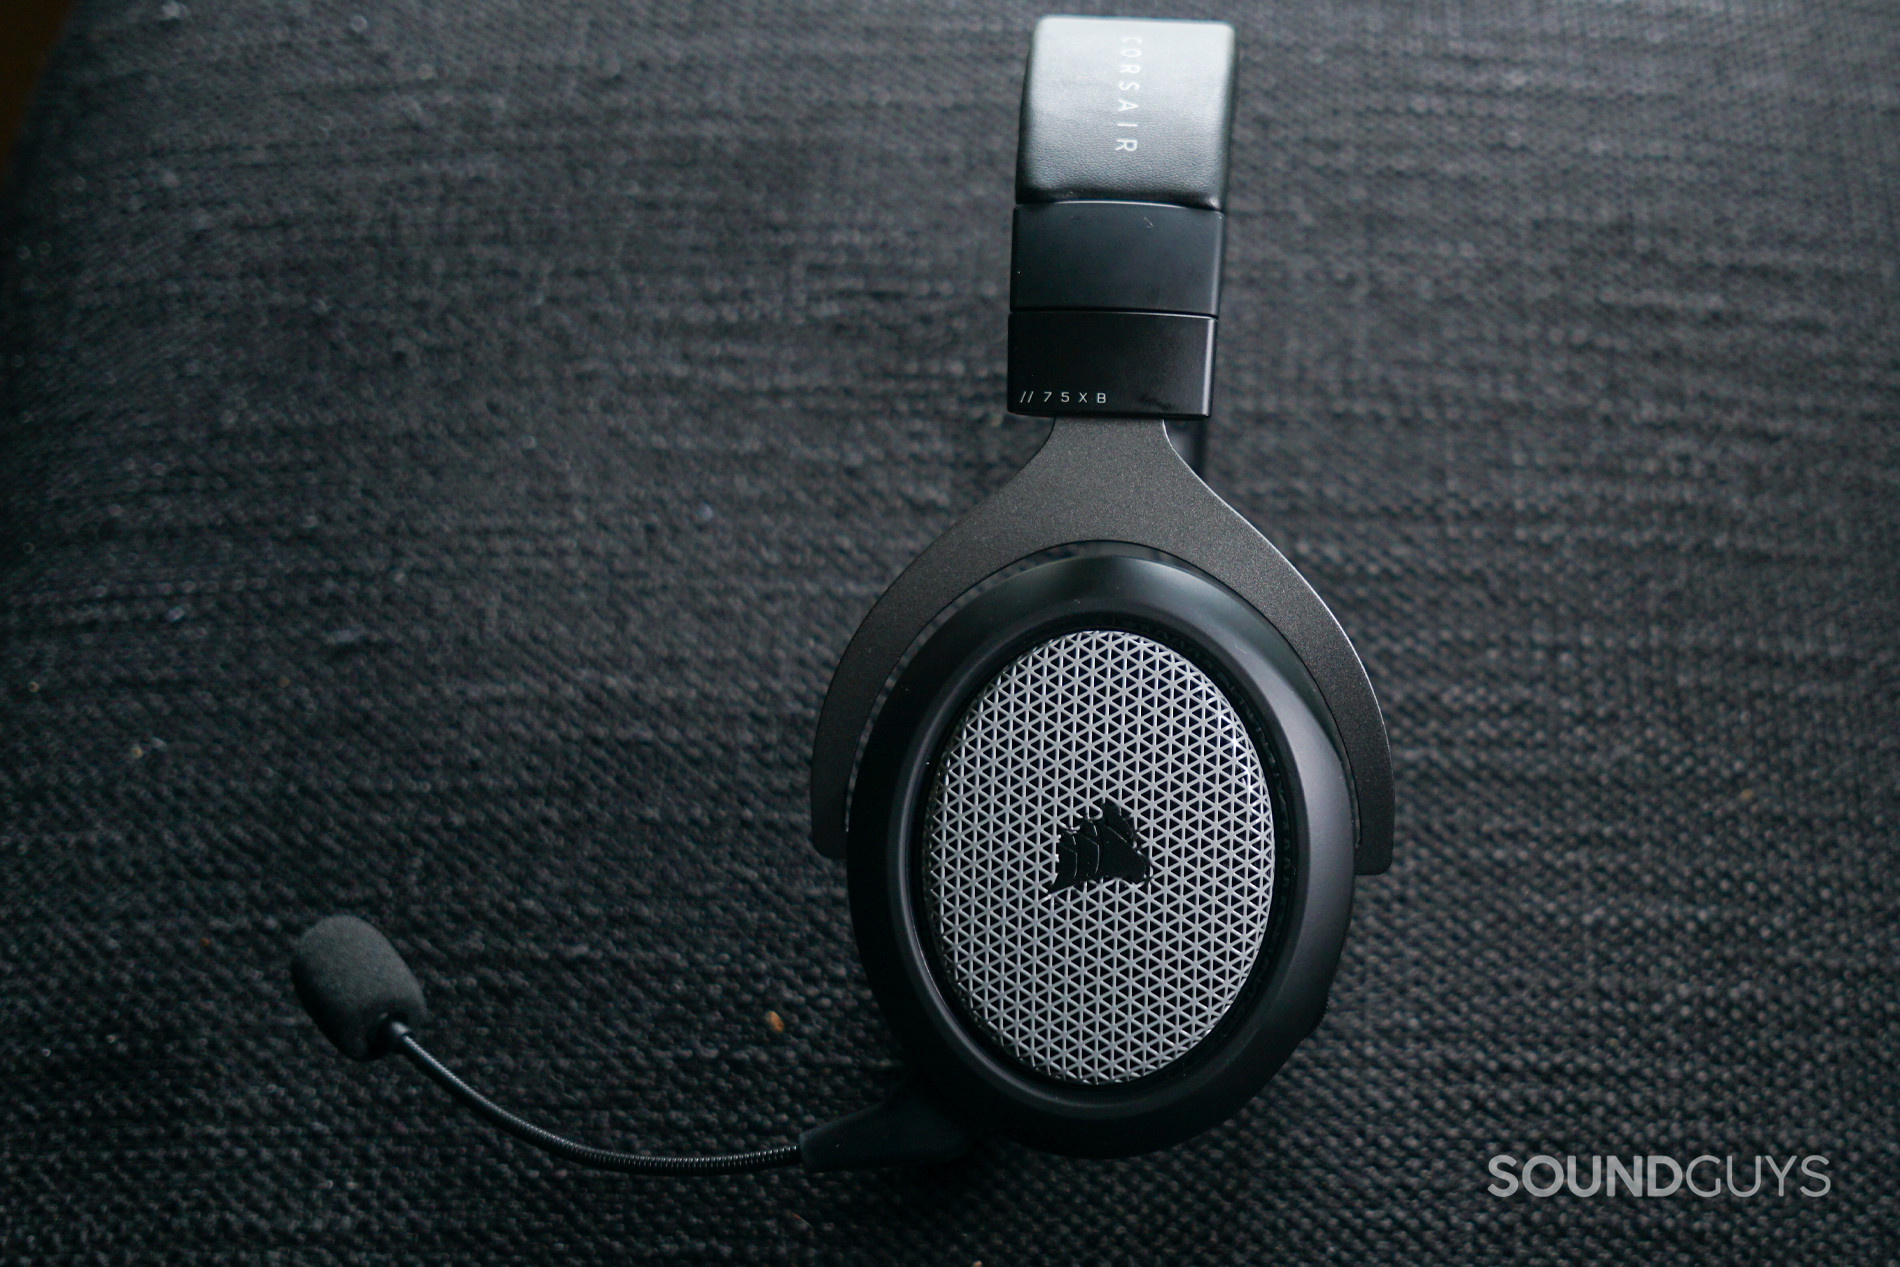 The Corsair HS75 XB Wireless lays on its side on a fabric surface